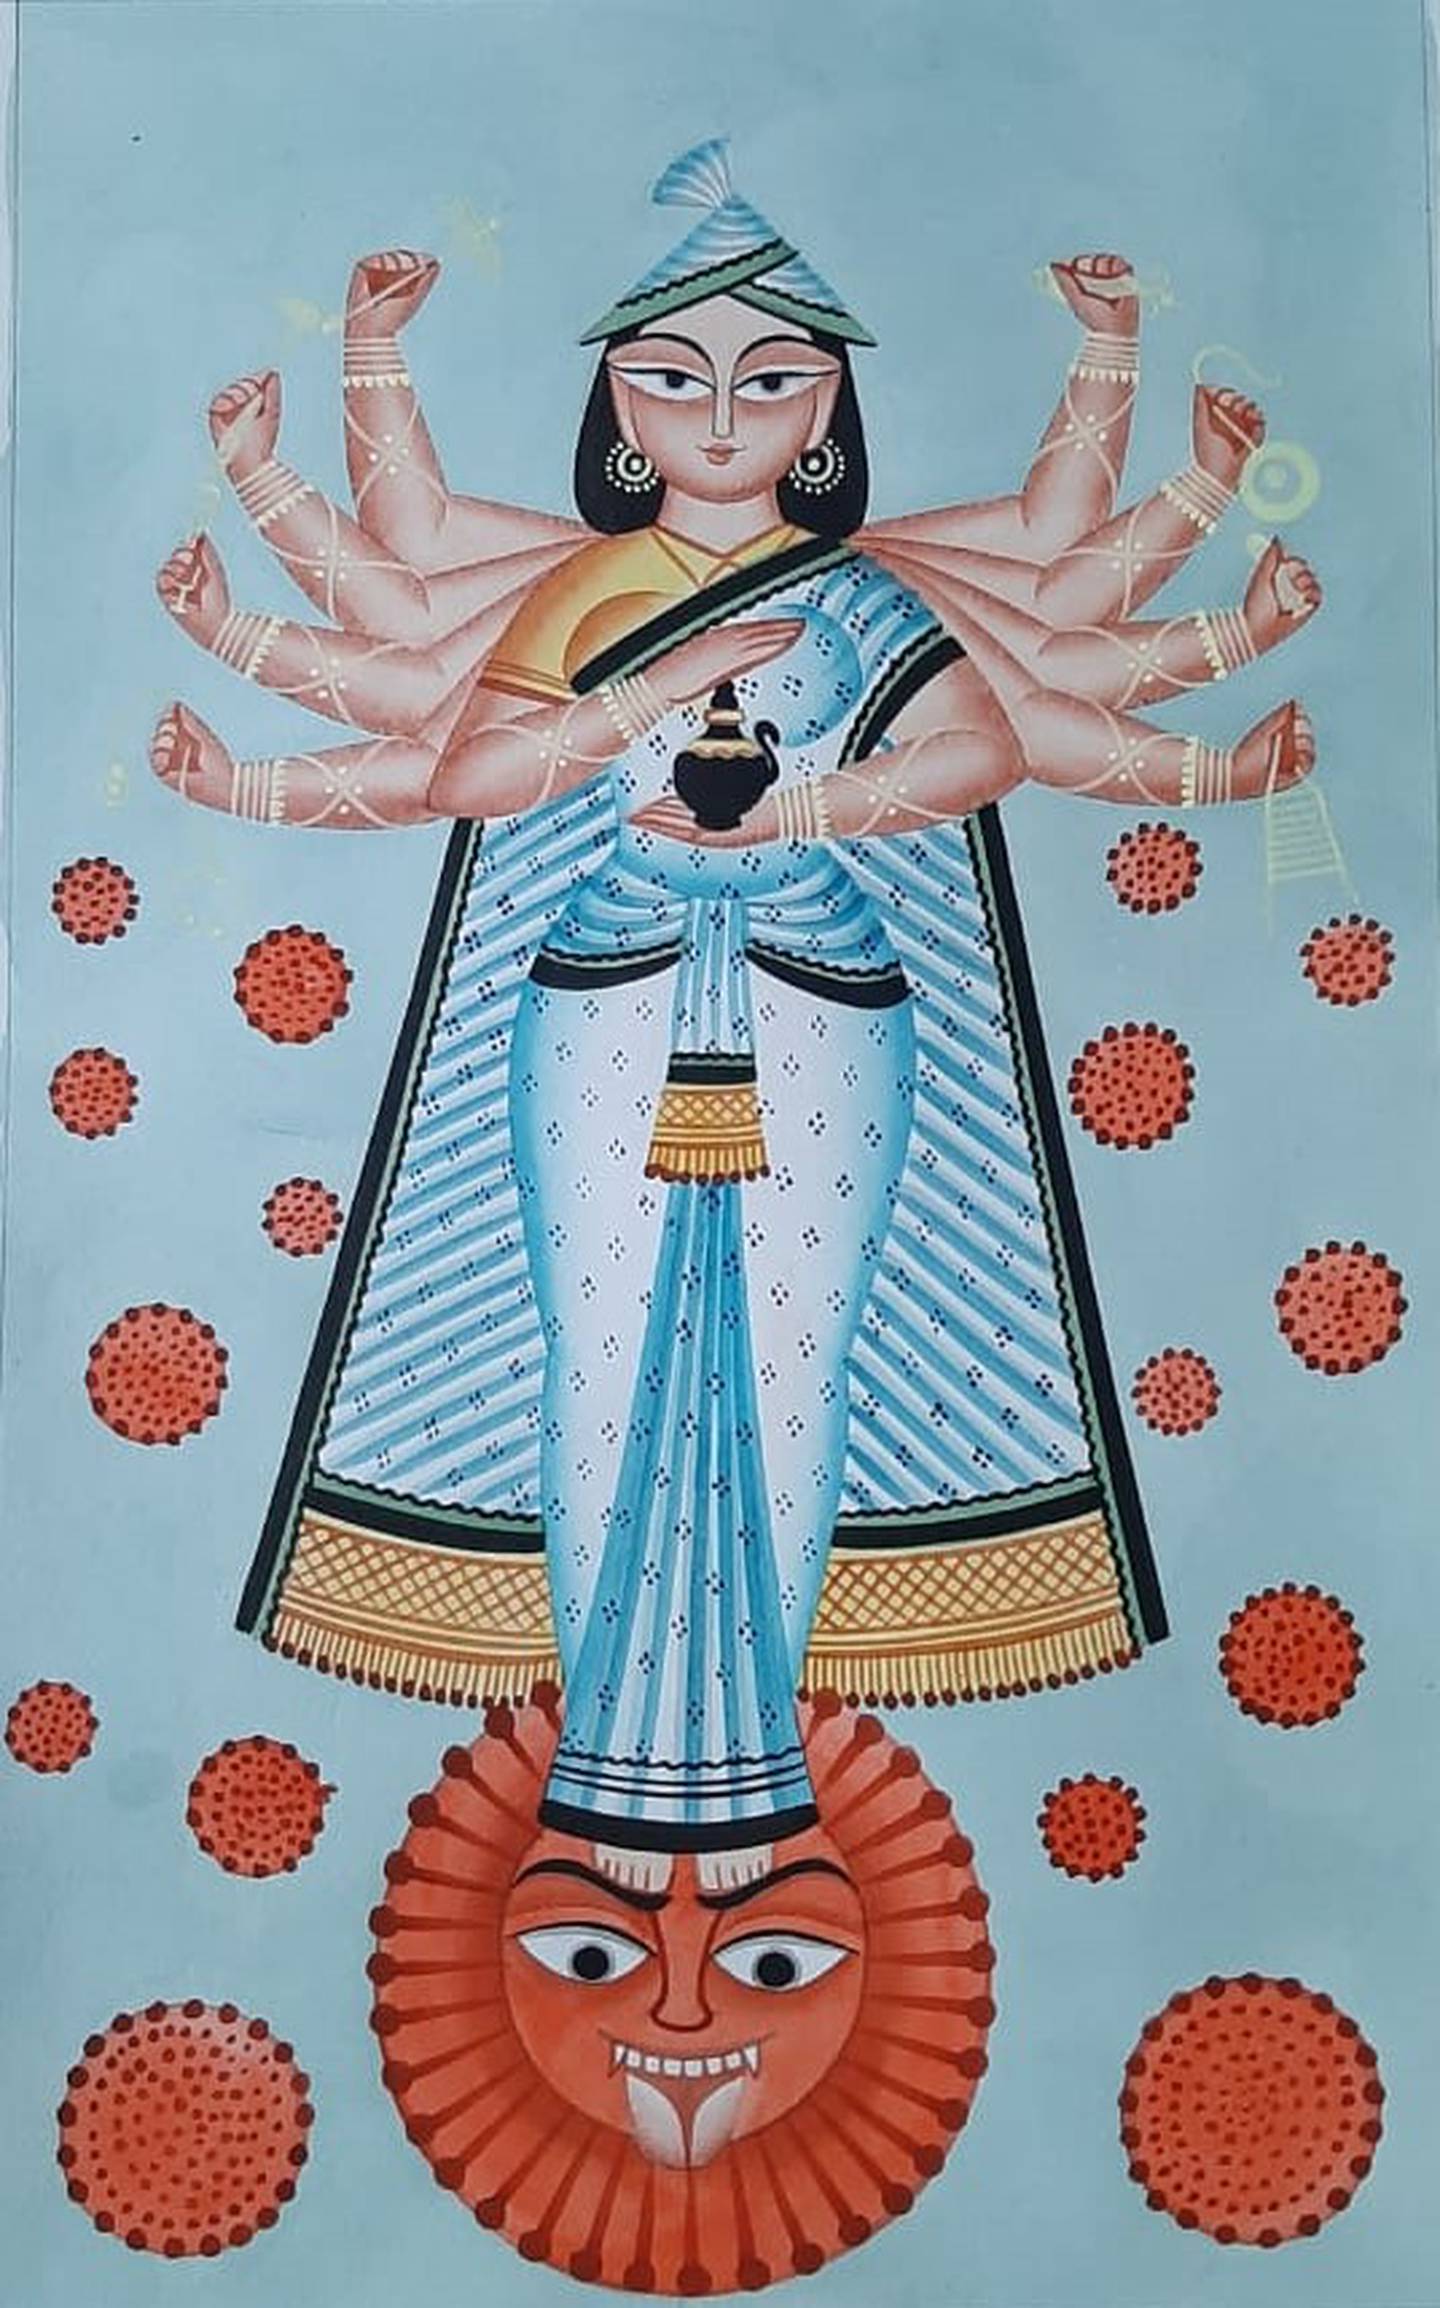 This work depicts a new god or goddess emerging to save the world when it is in deep trouble. It is a belief held by every devout Hindu. Using the image of Durga, Anwar depicts the new goddess as she arrives to conquer the pandemic evil. Photo: Anwar Chitrakar